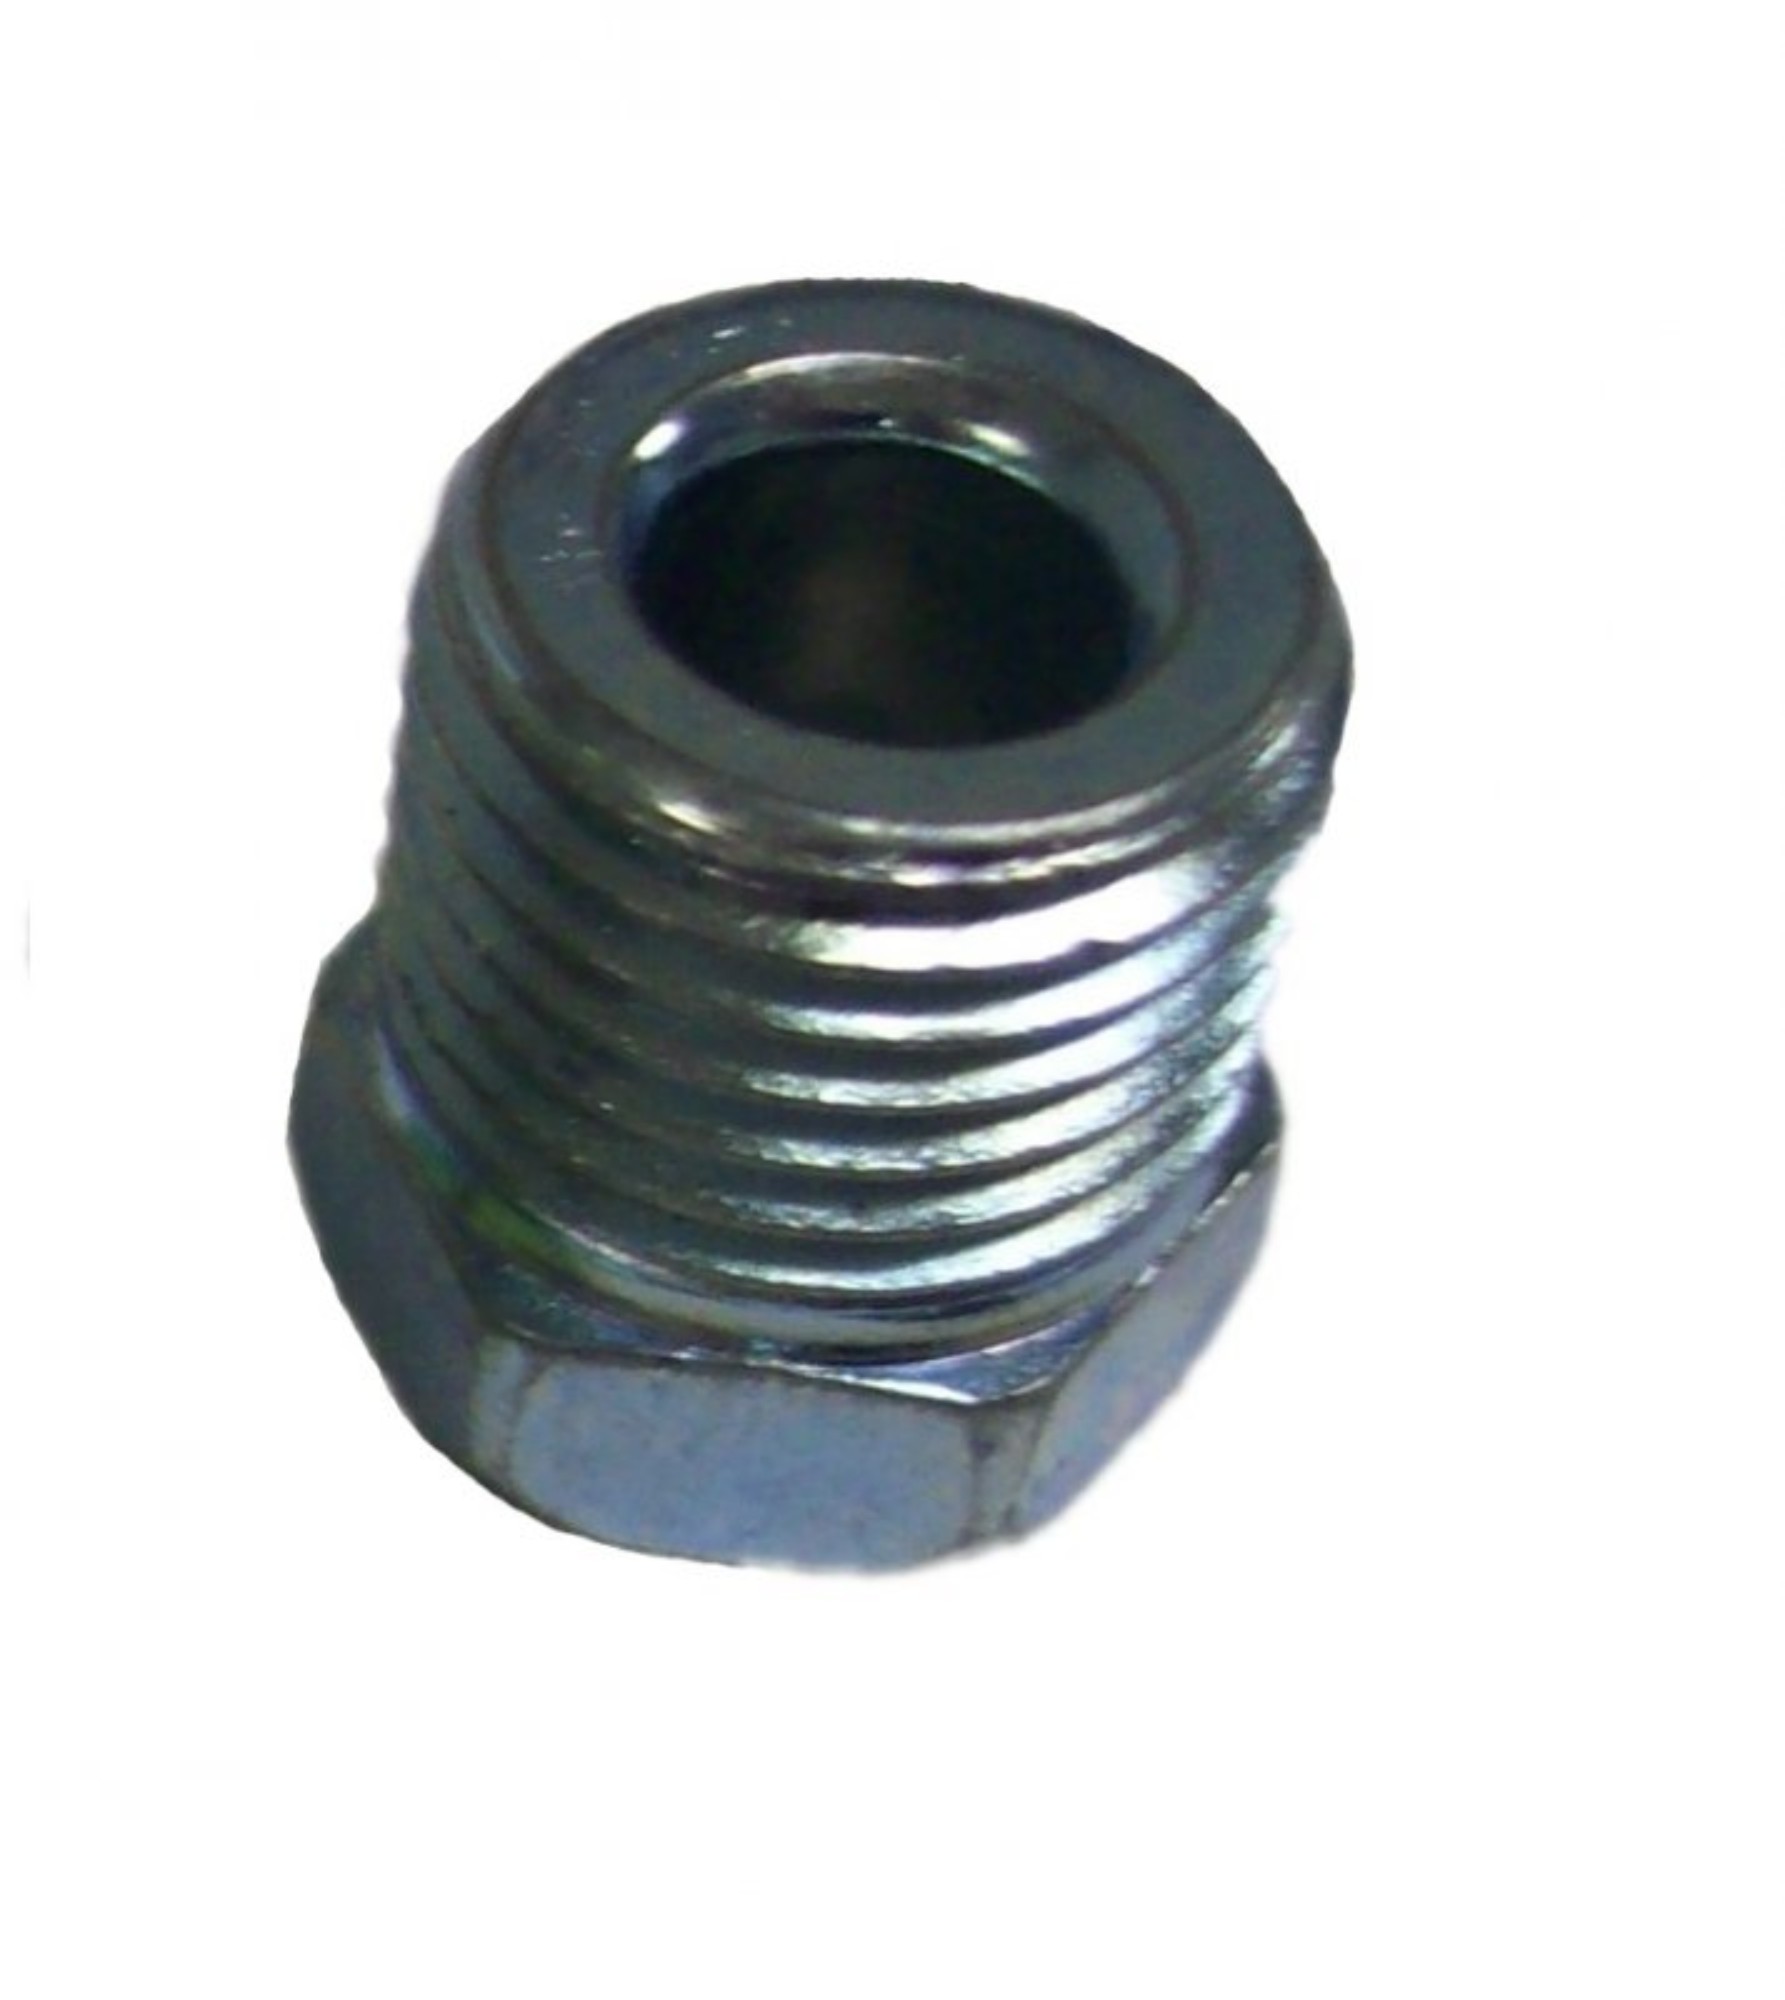 Inverted flare fitting 9/16-18 for 1/4 inch line - FT9161814